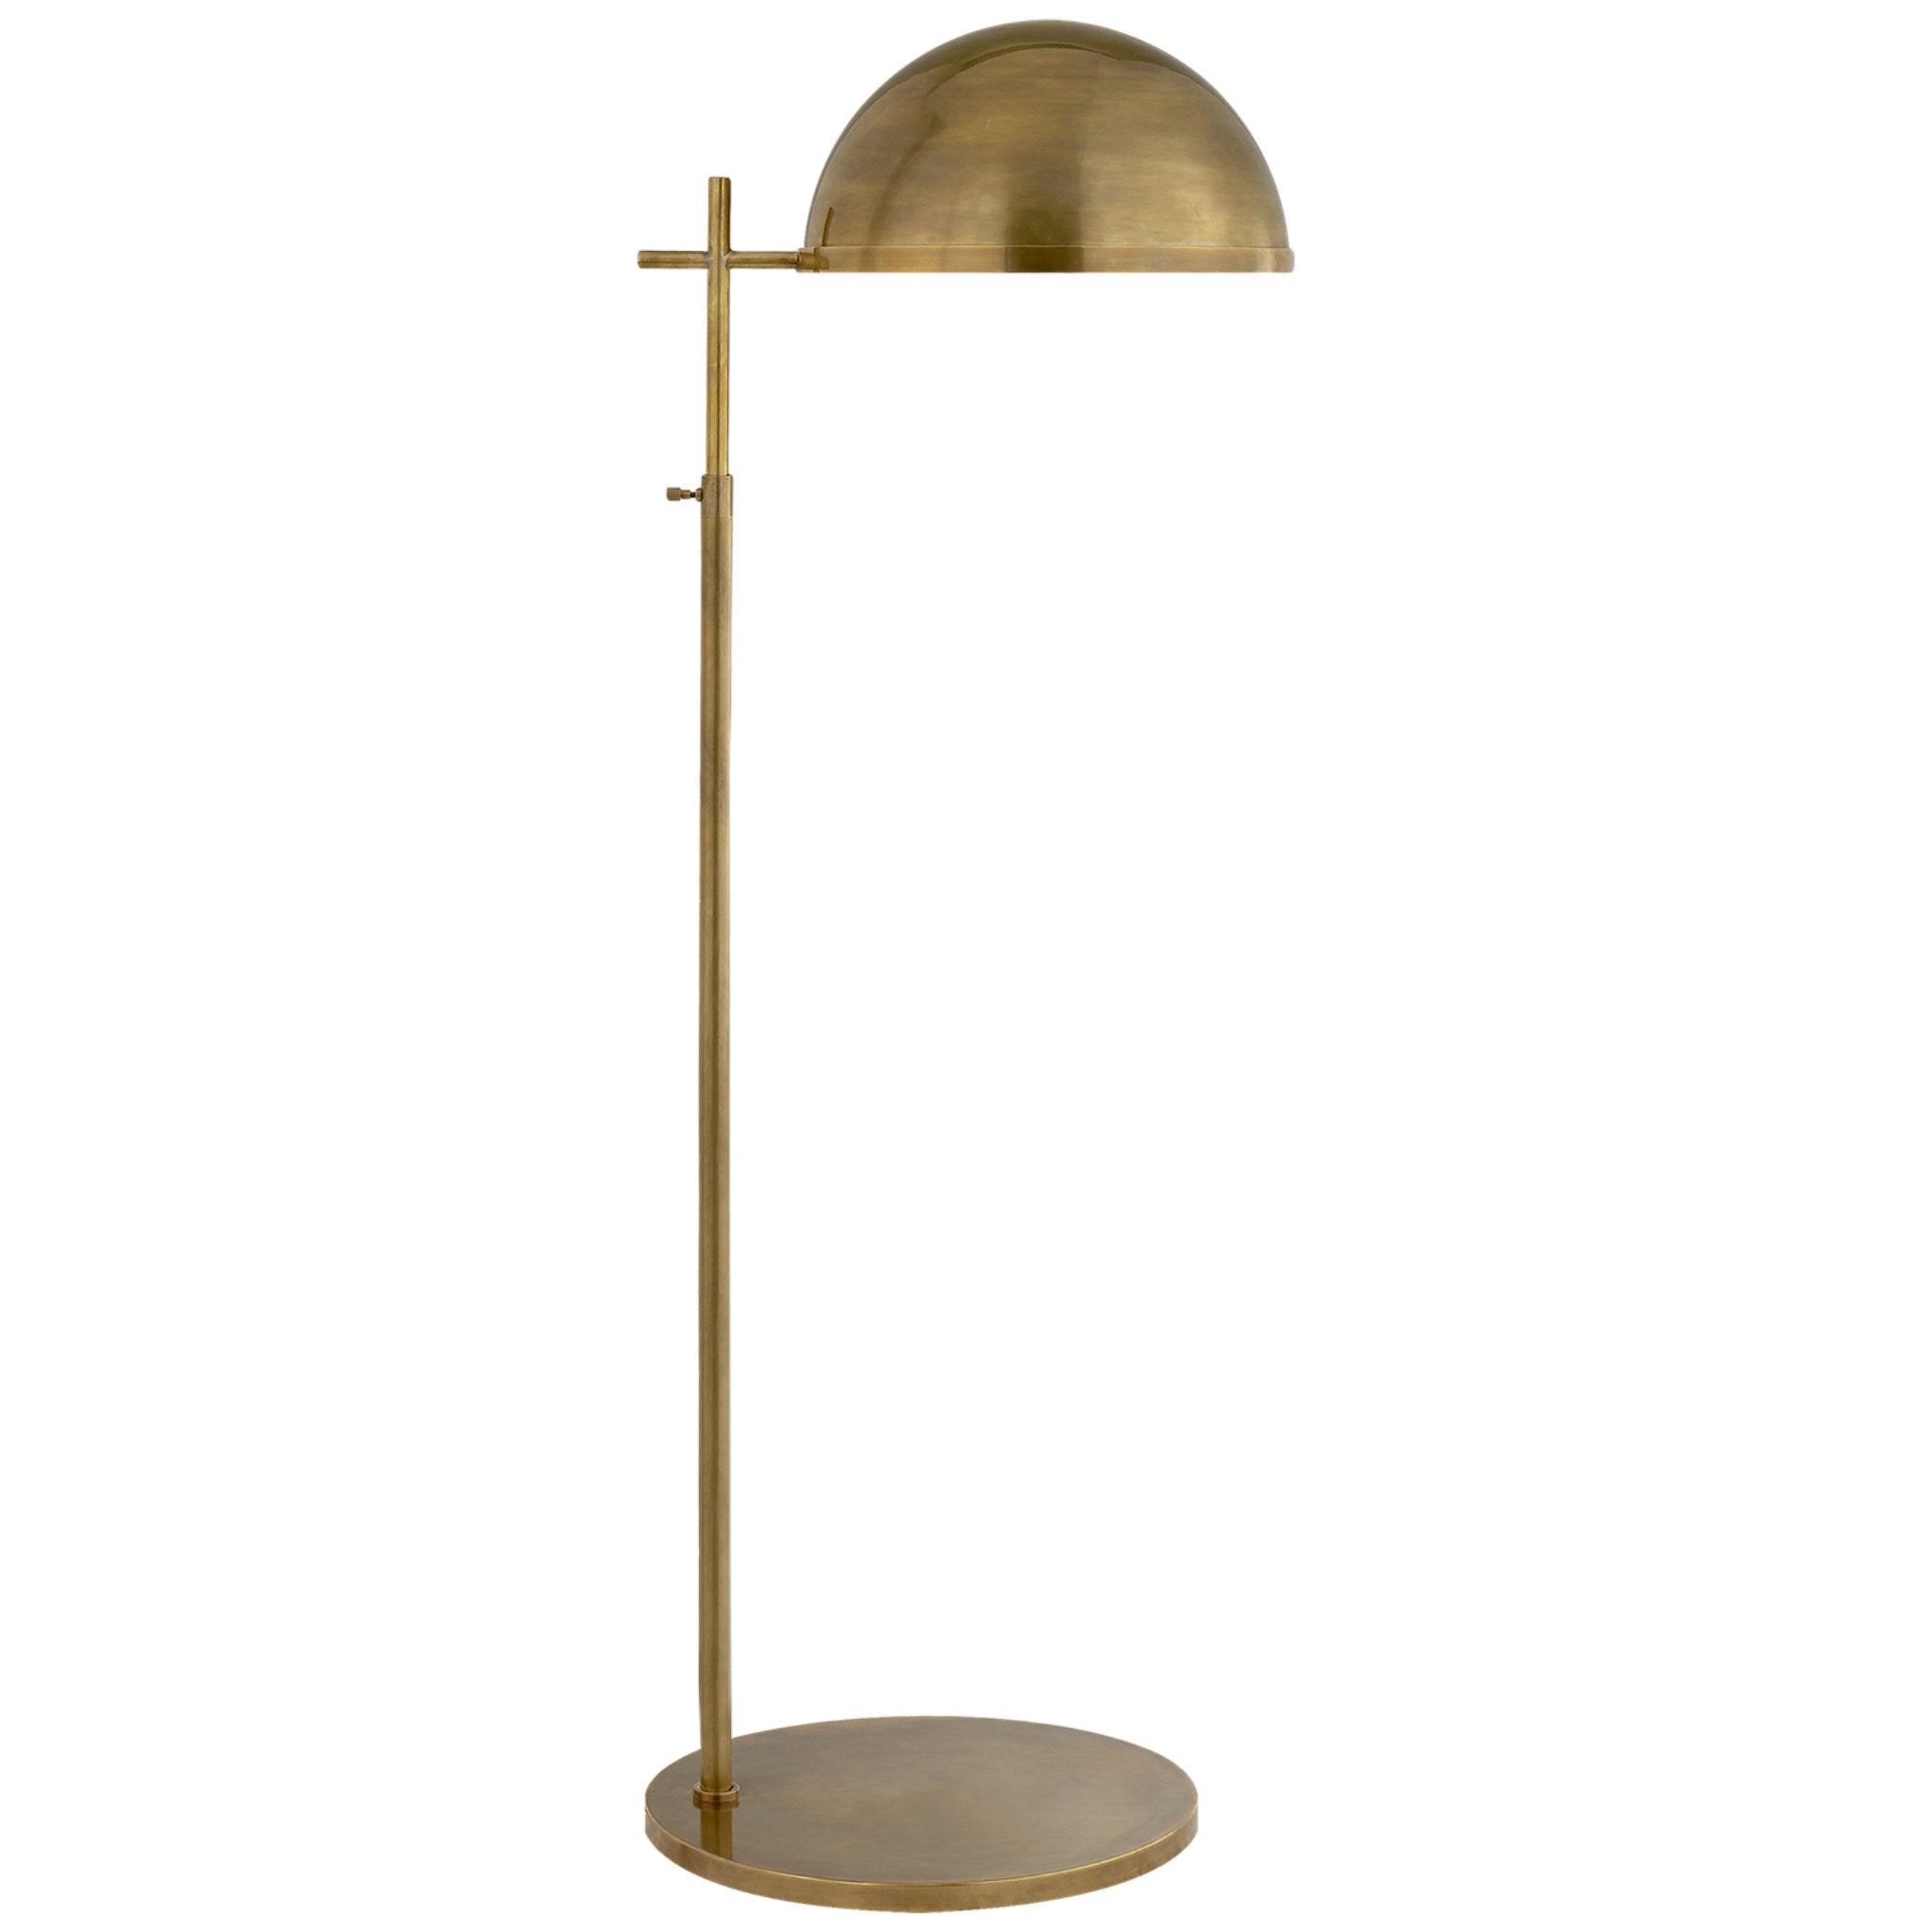 Kelly Wearstler Dulcet Medium Pharmacy Floor Lamp in Antique-Burnished Brass with Antique-Burnished Brass Shade